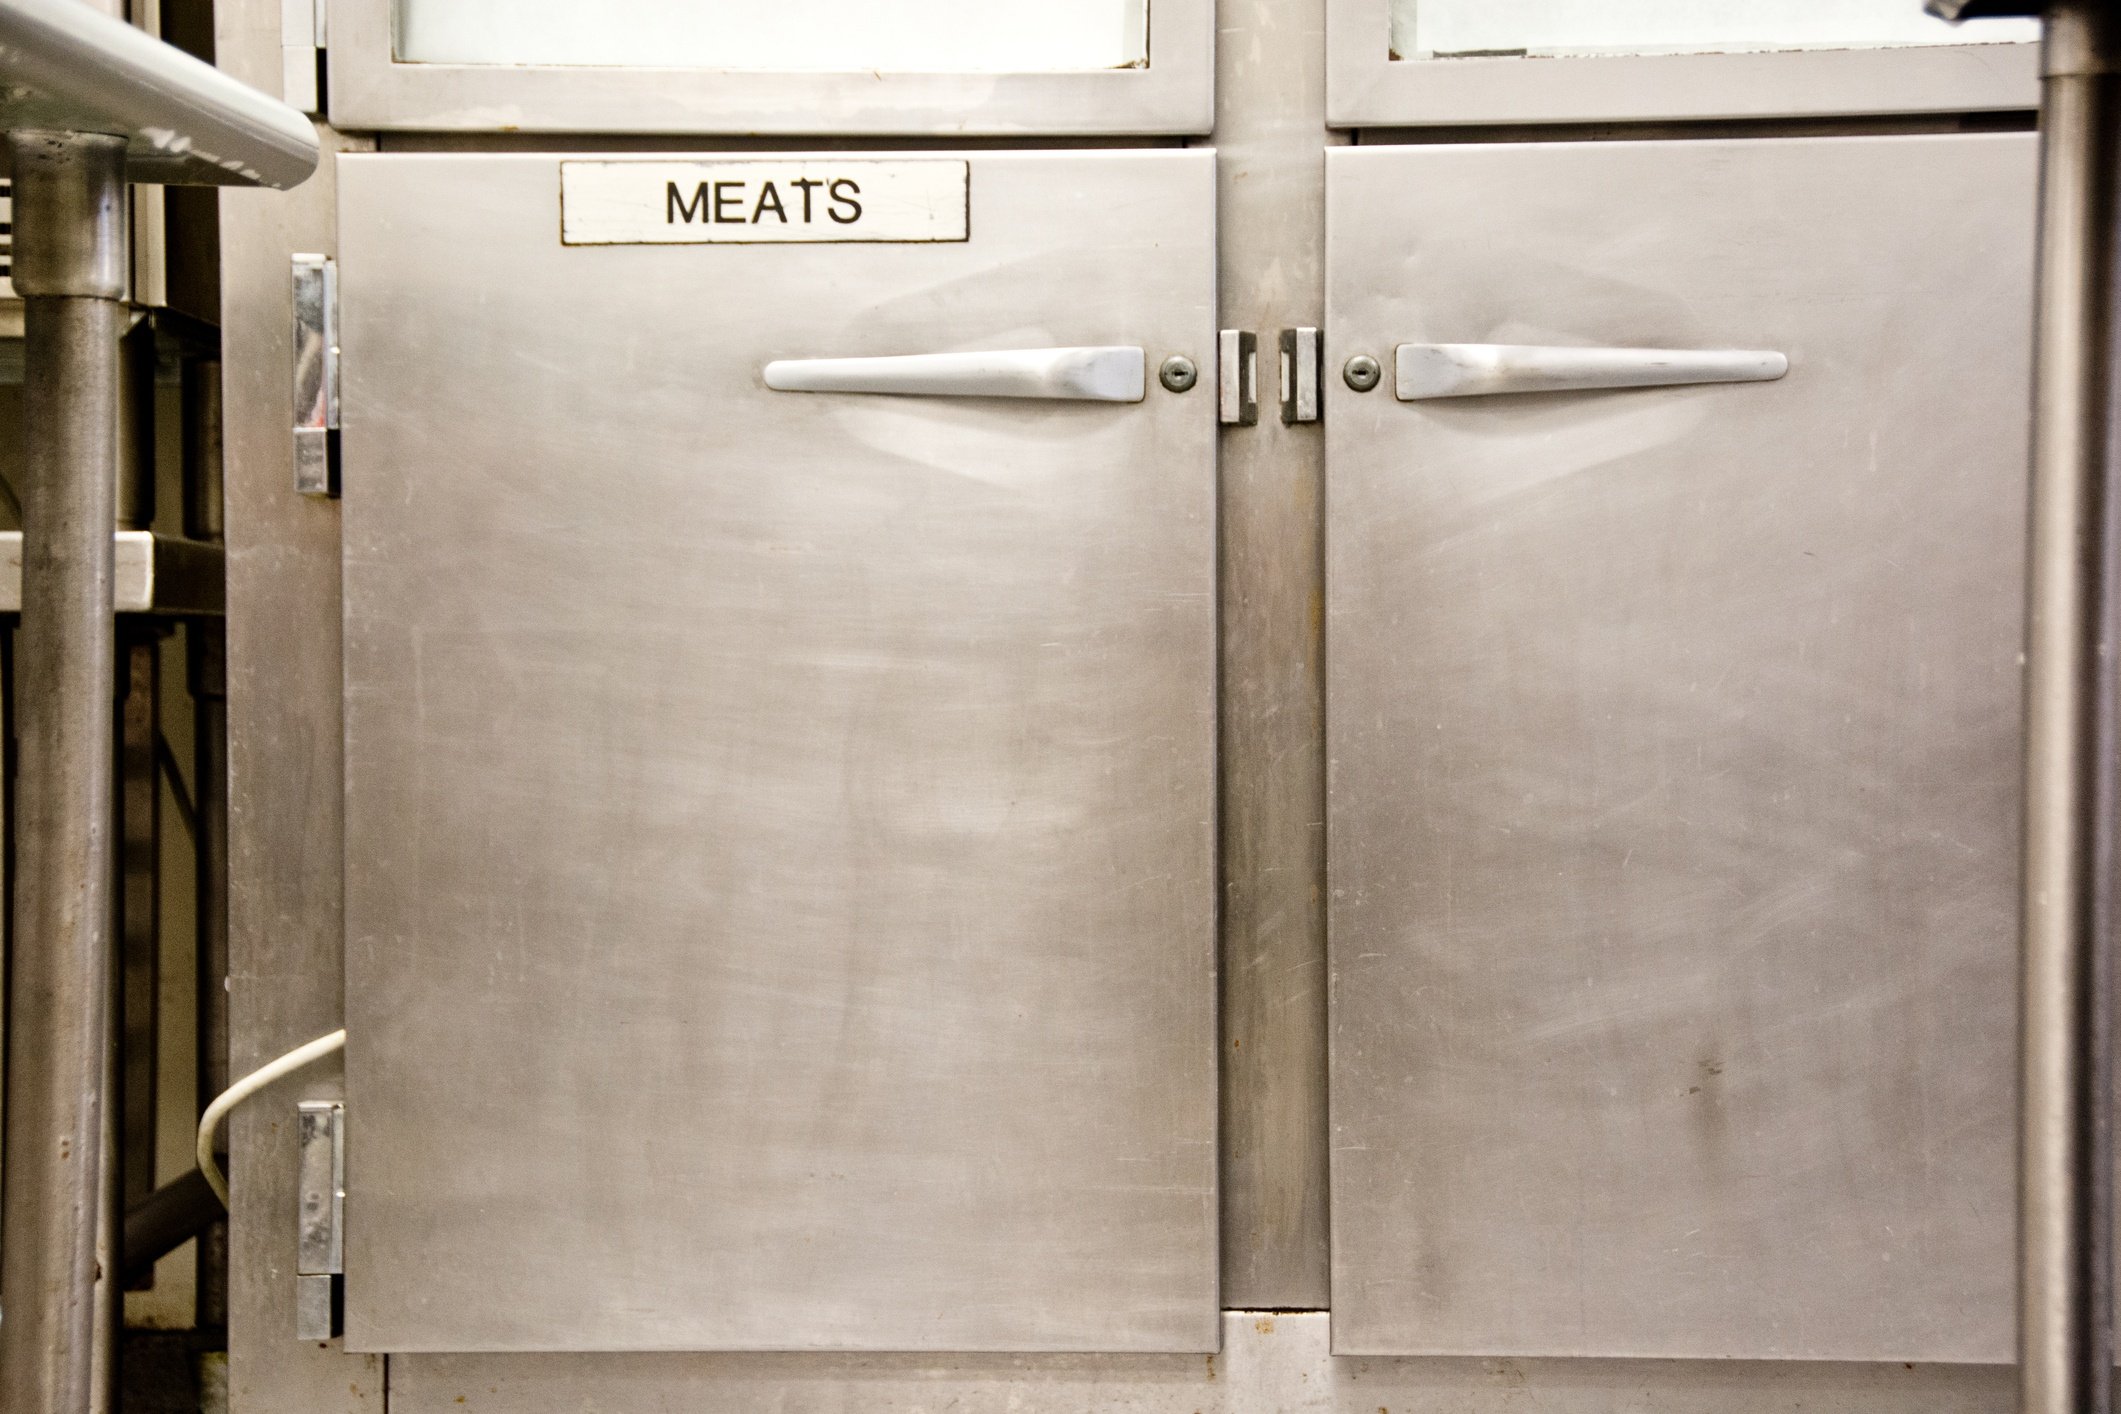 This cooler in a commerial kitchen is specially labeled for meat only.